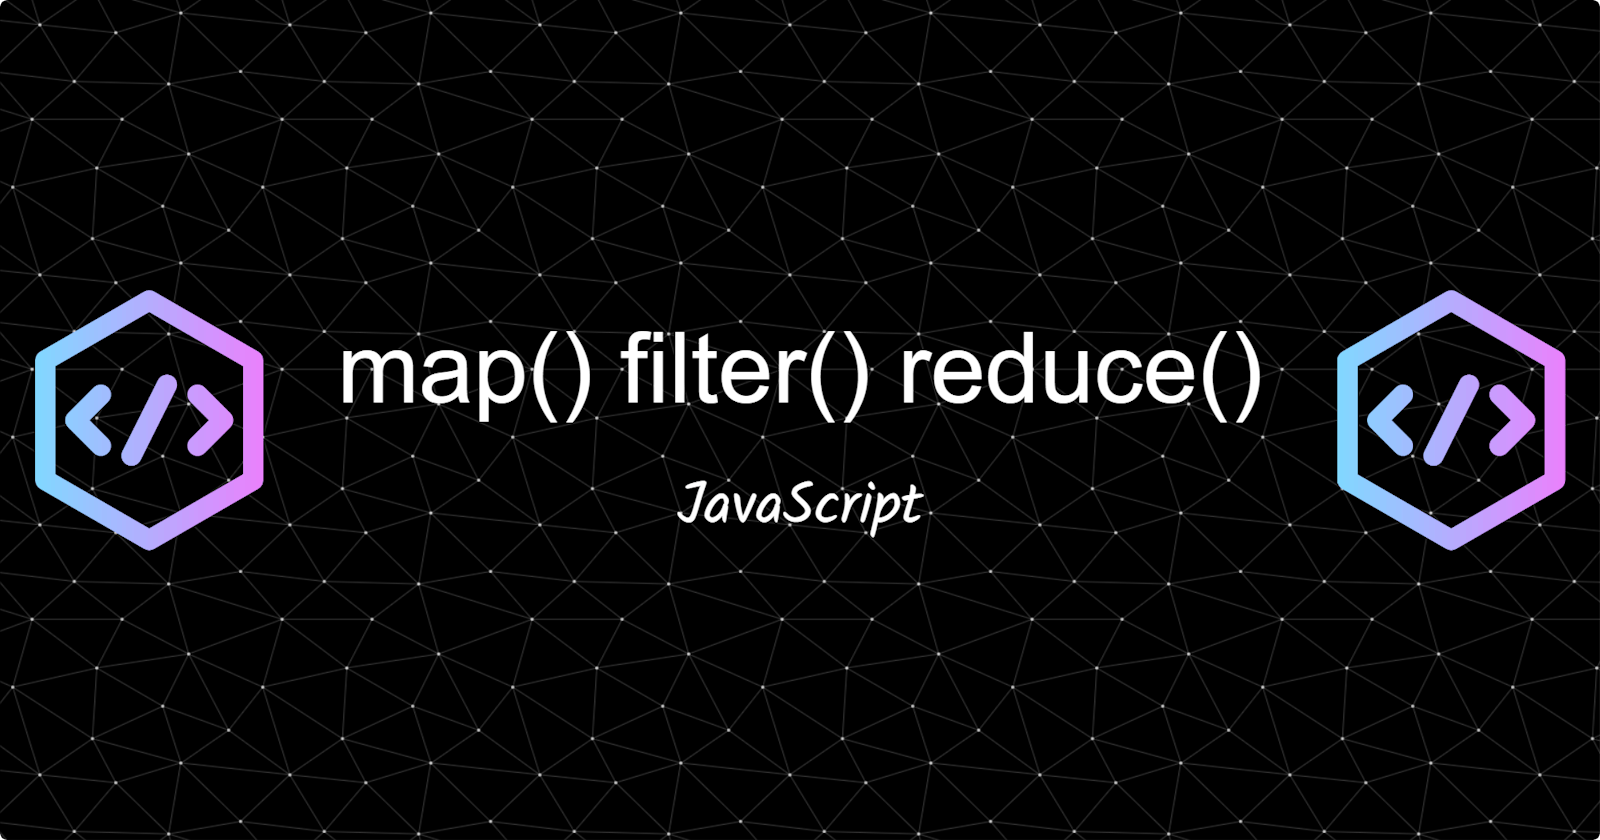 map(),filter() and reduce()